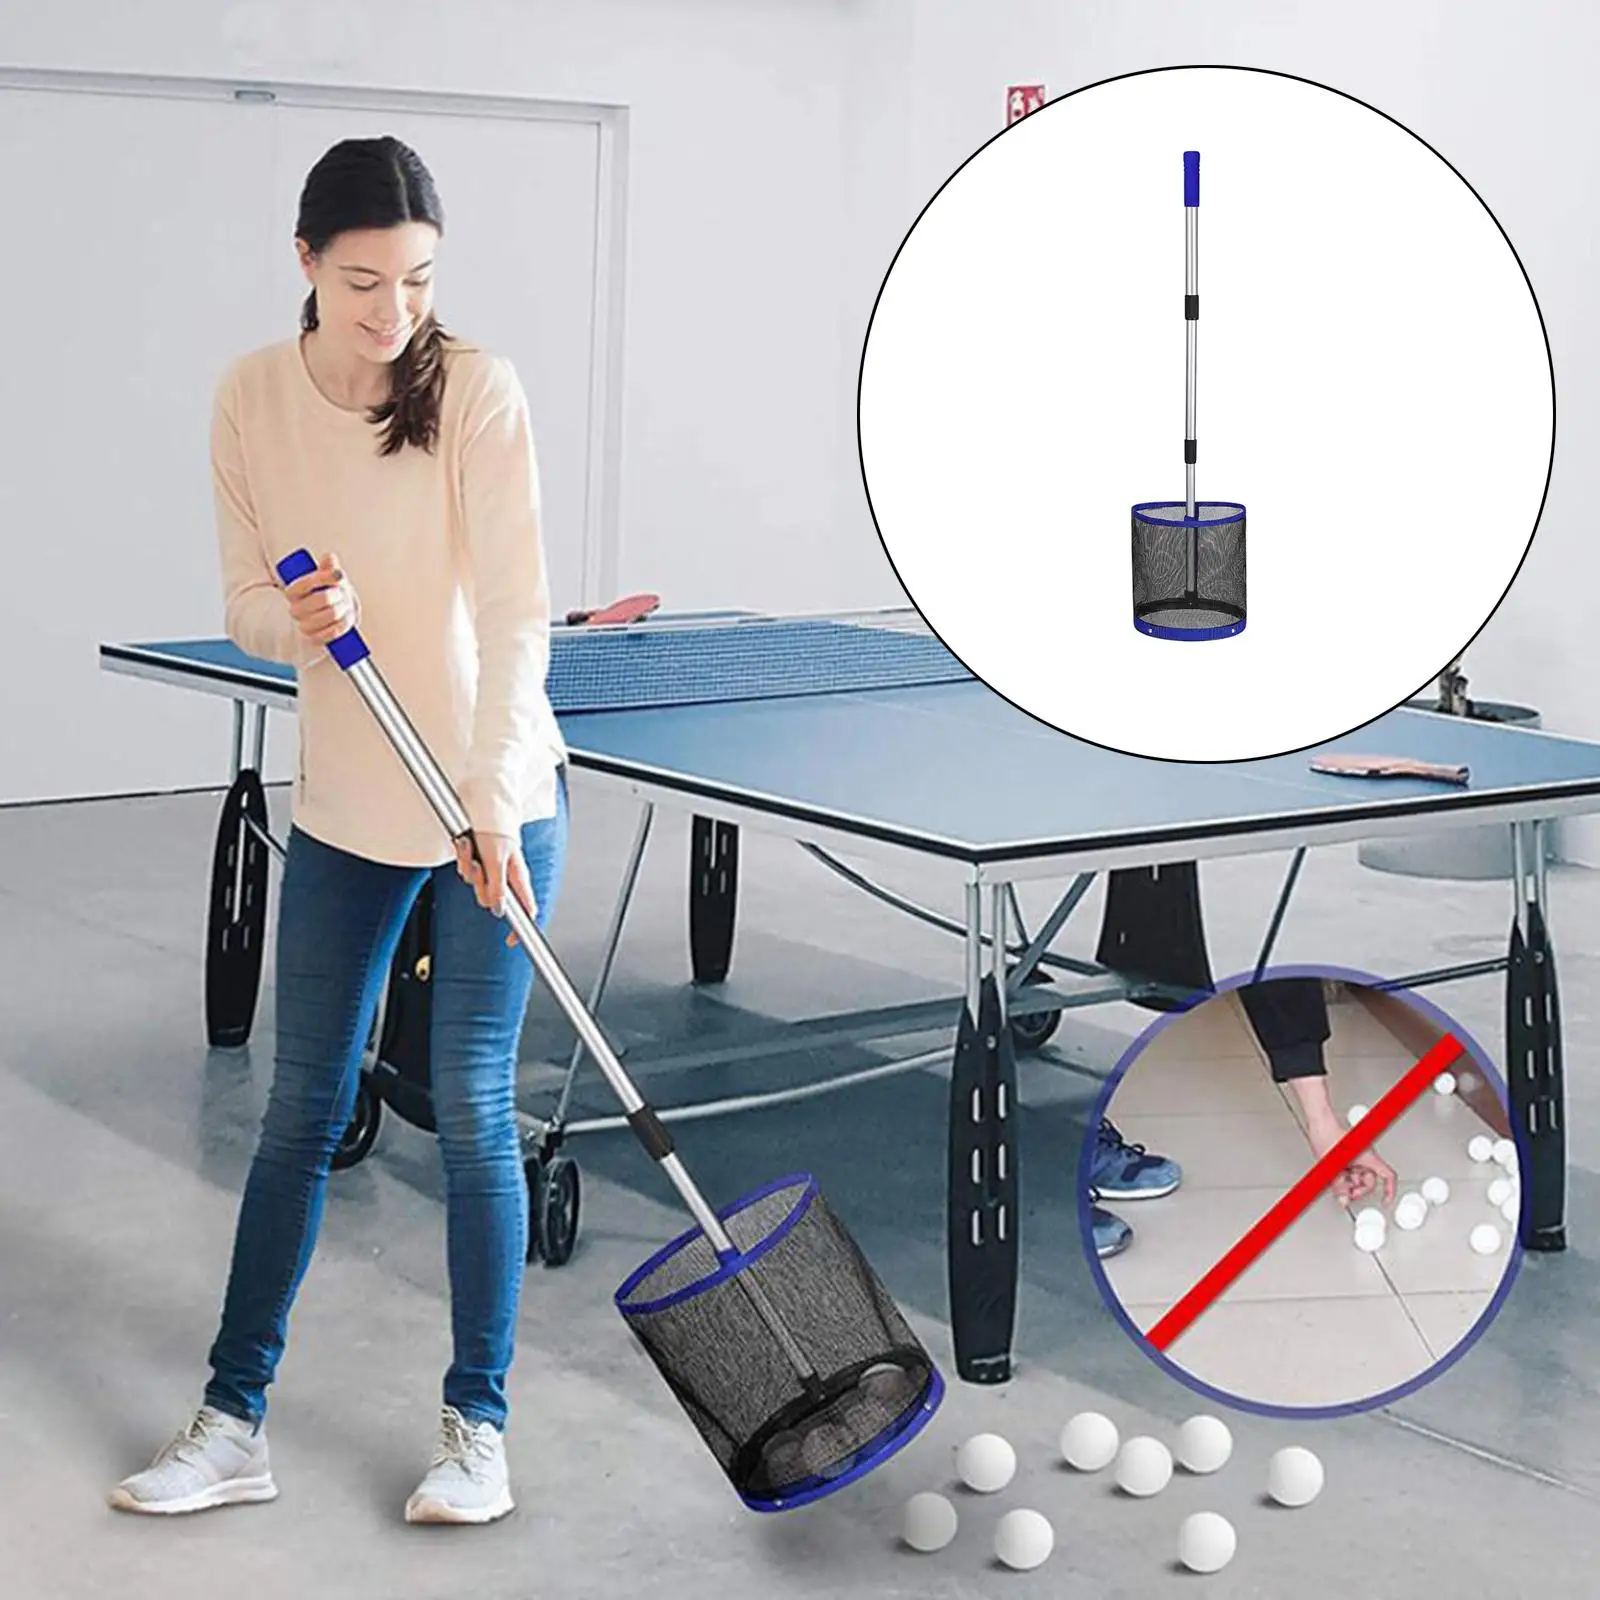 Ball Collector, Ball Picker Upper for Tennis, ,  and , Holds